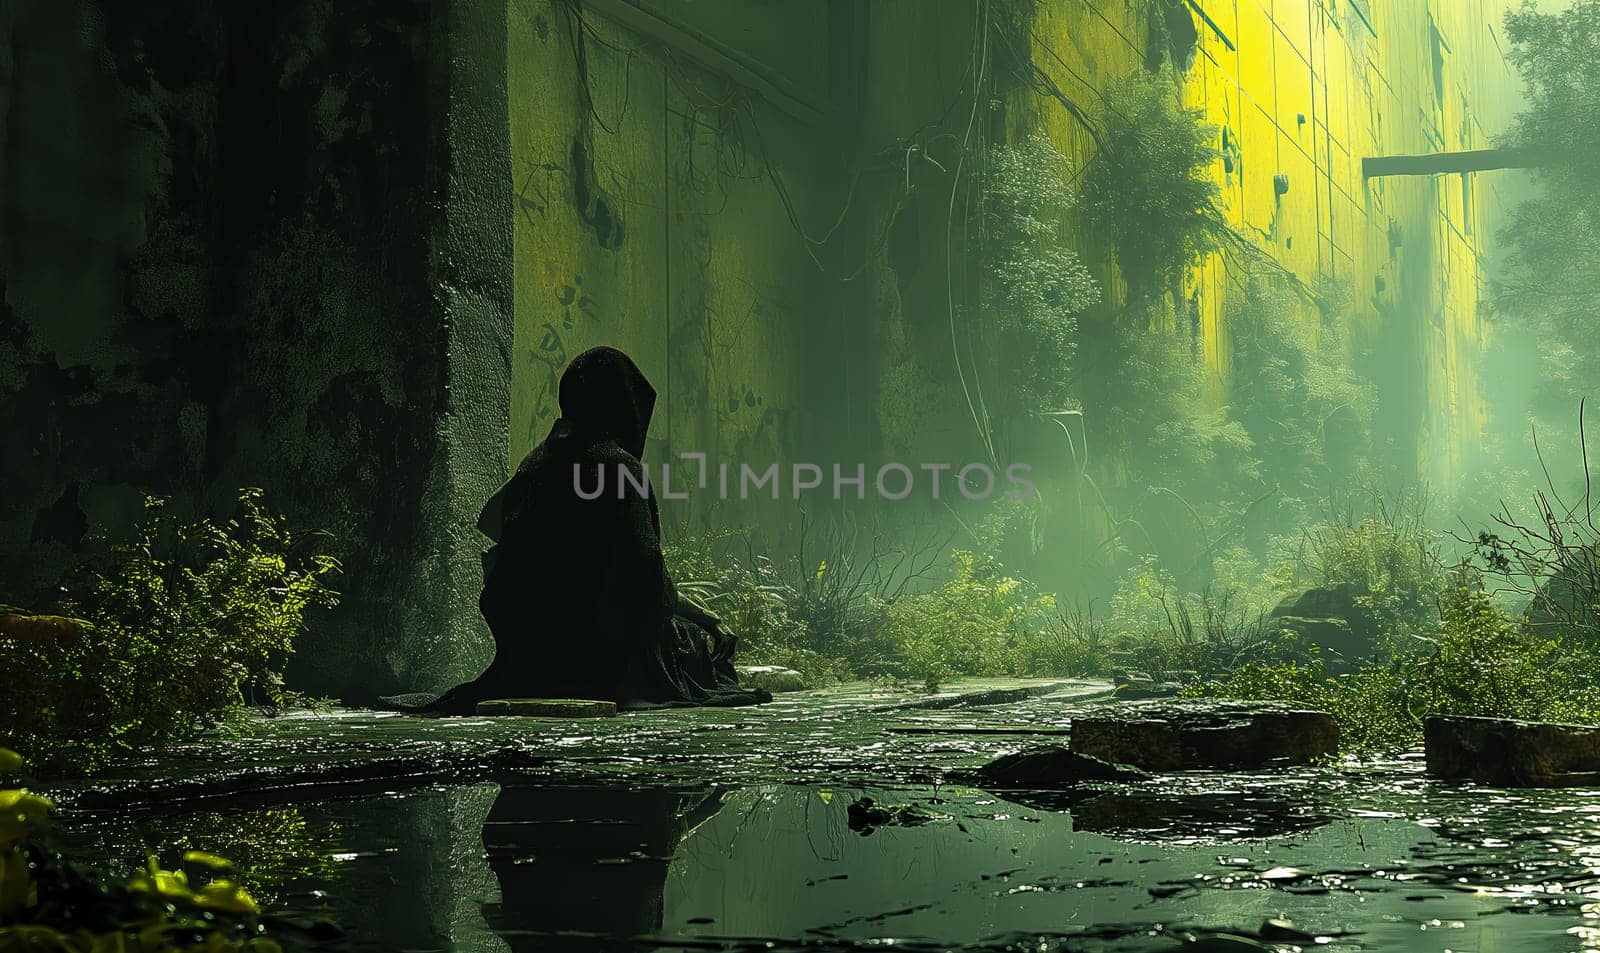 A lone person sits in a desolate, overgrown alley.